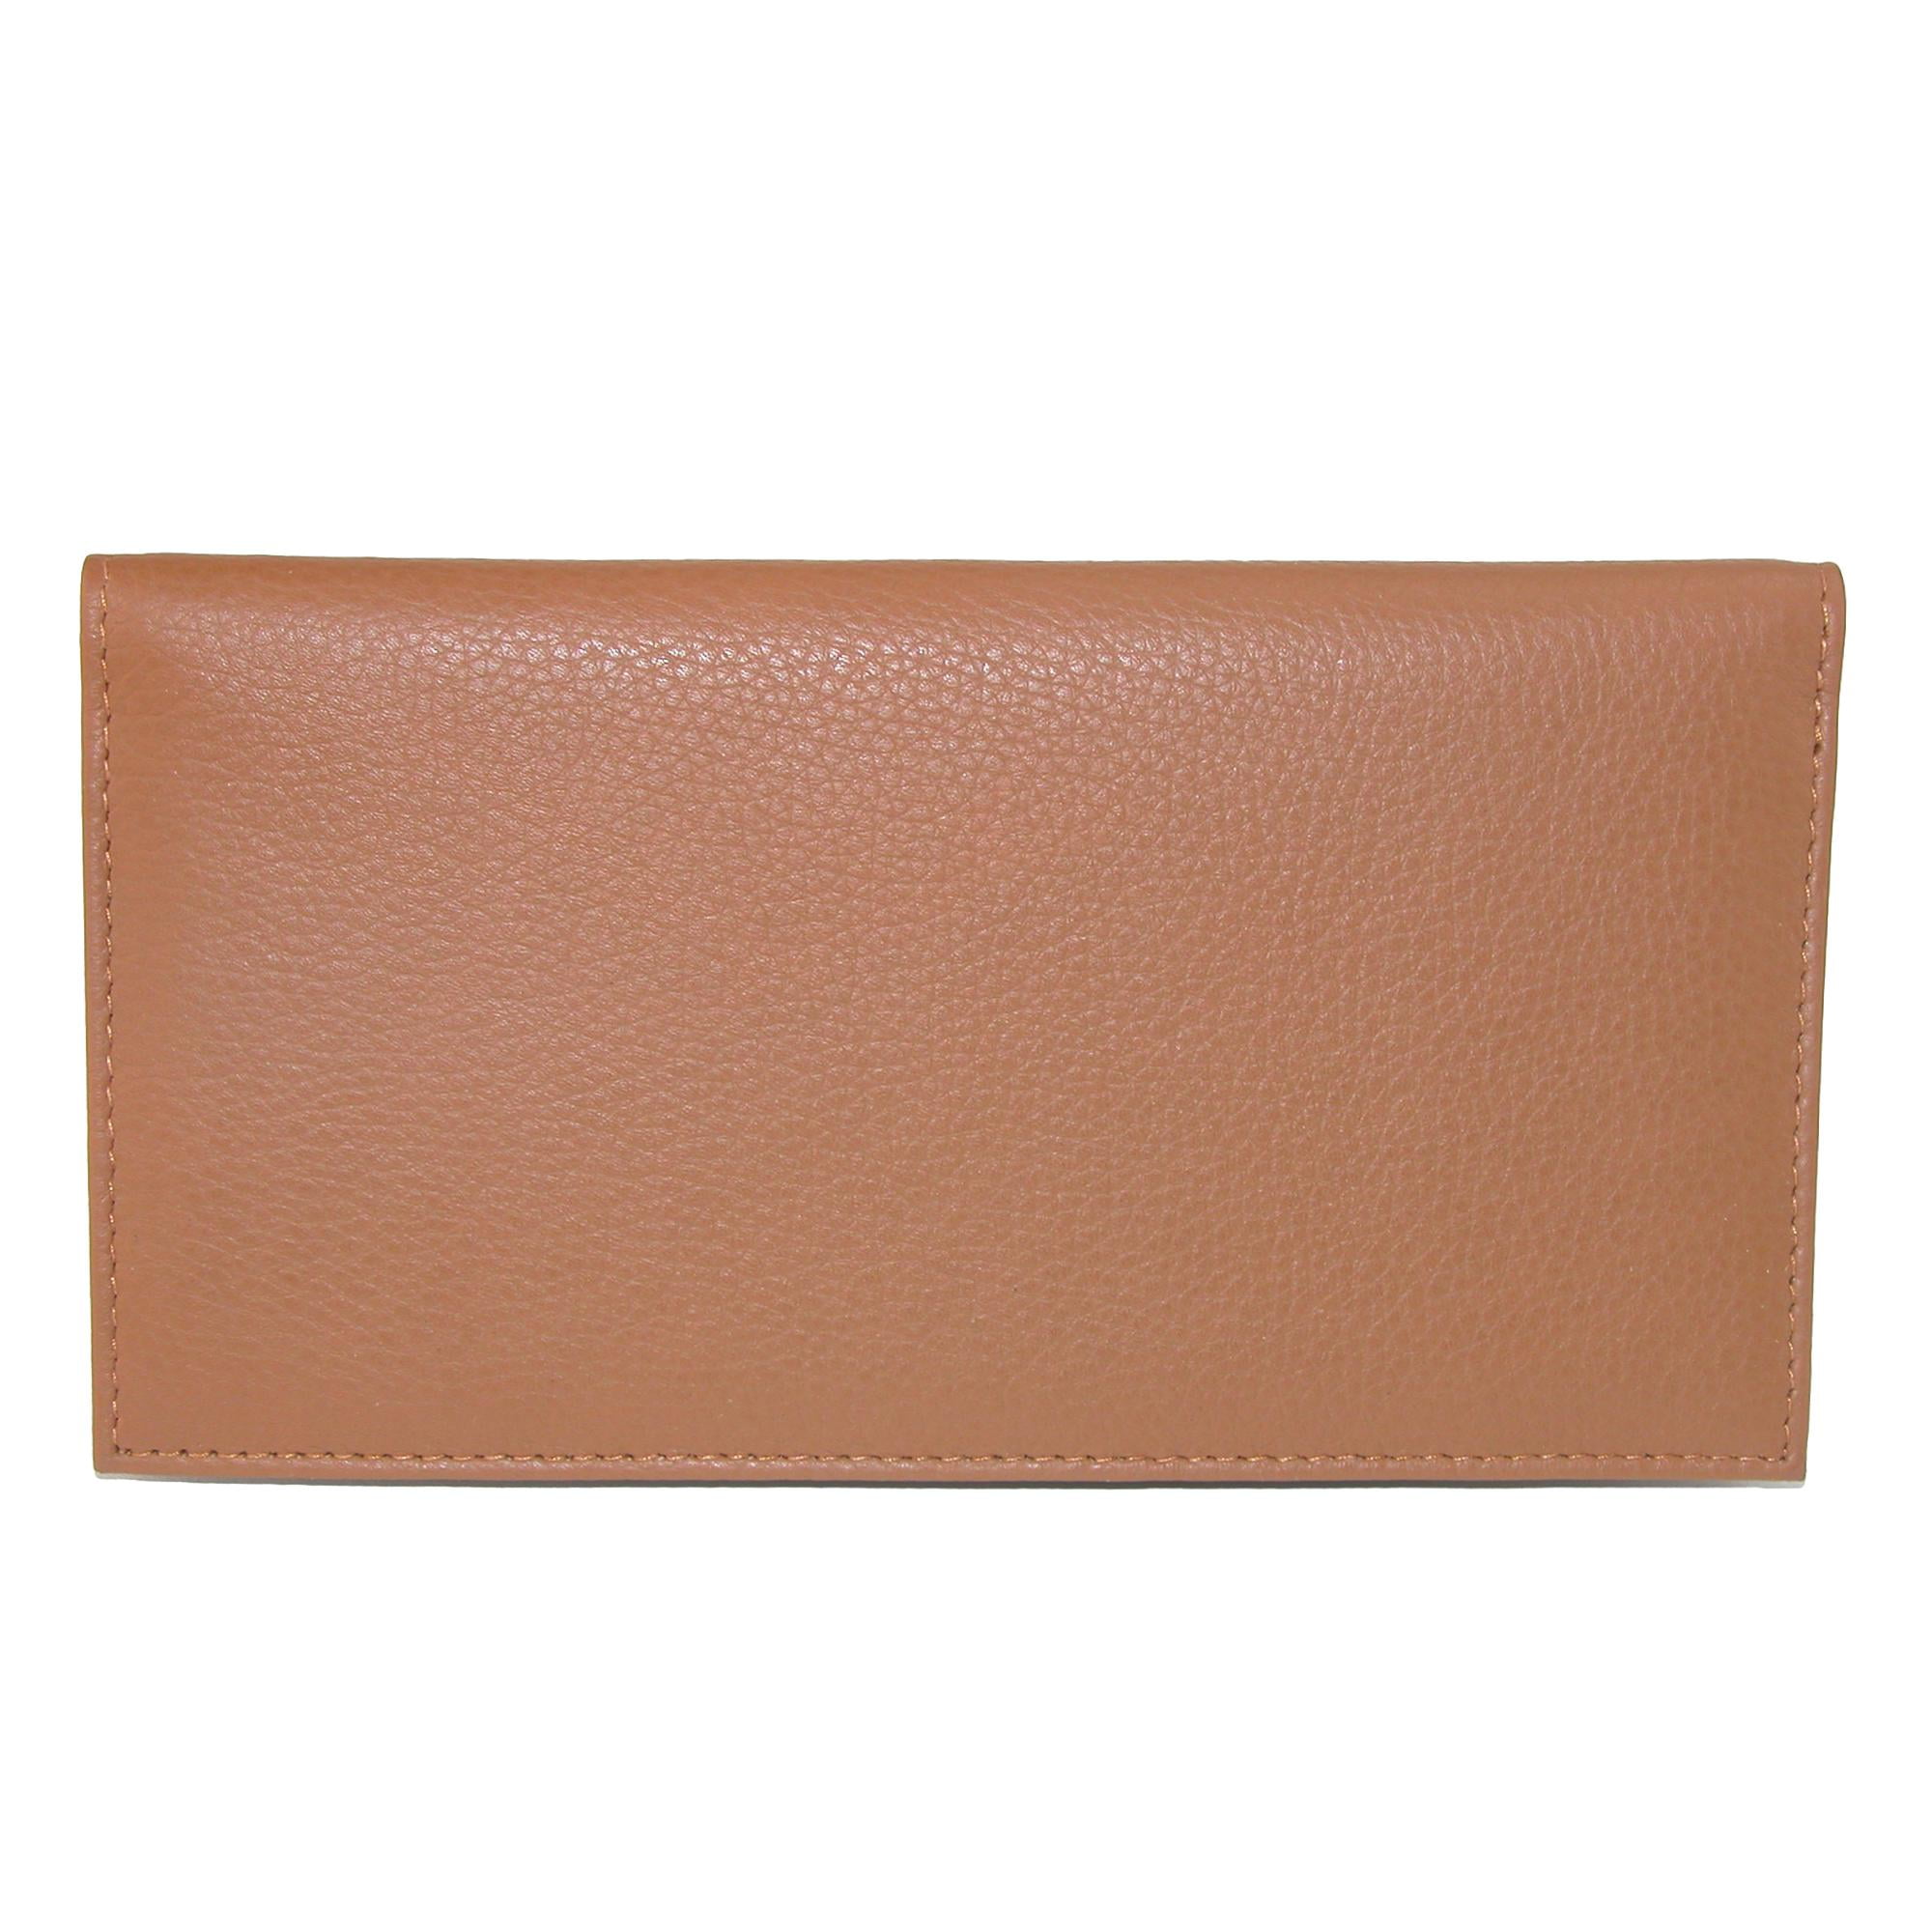 CTM Leather Solid Color Checkbook Cover | Walmart Canada